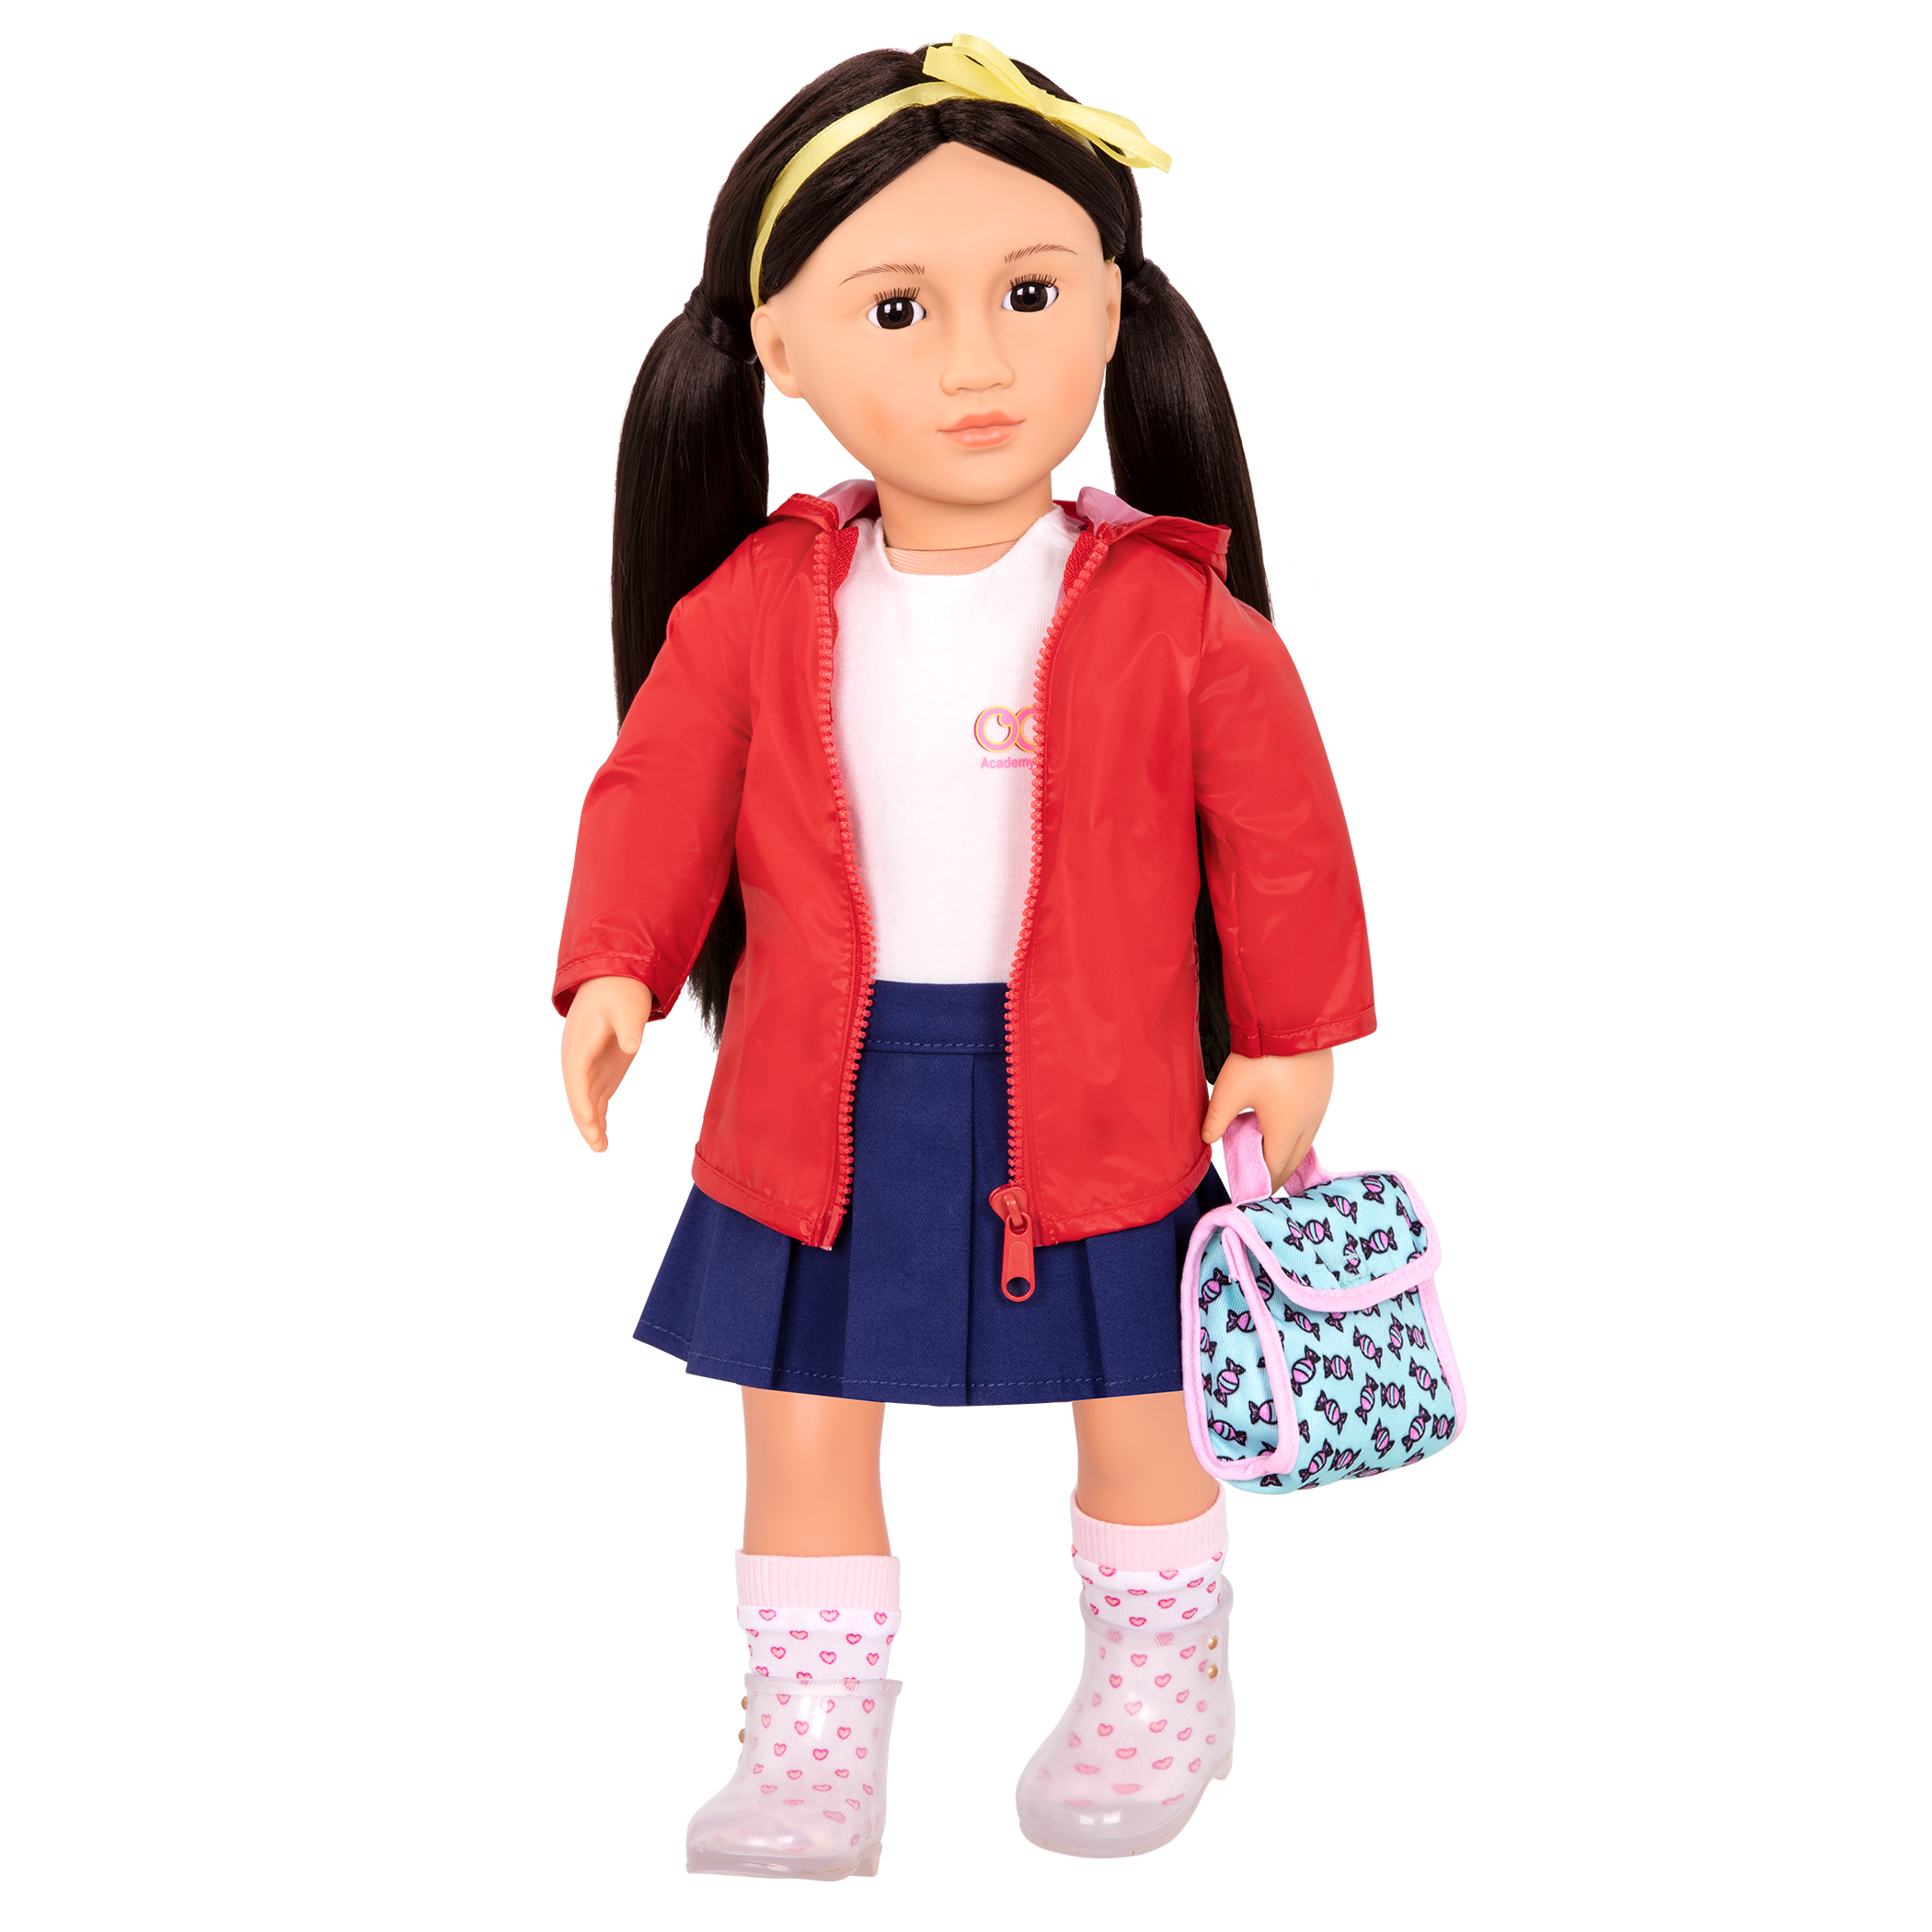 Aiko wearing Rainy Recess School Outfit with lunchbox